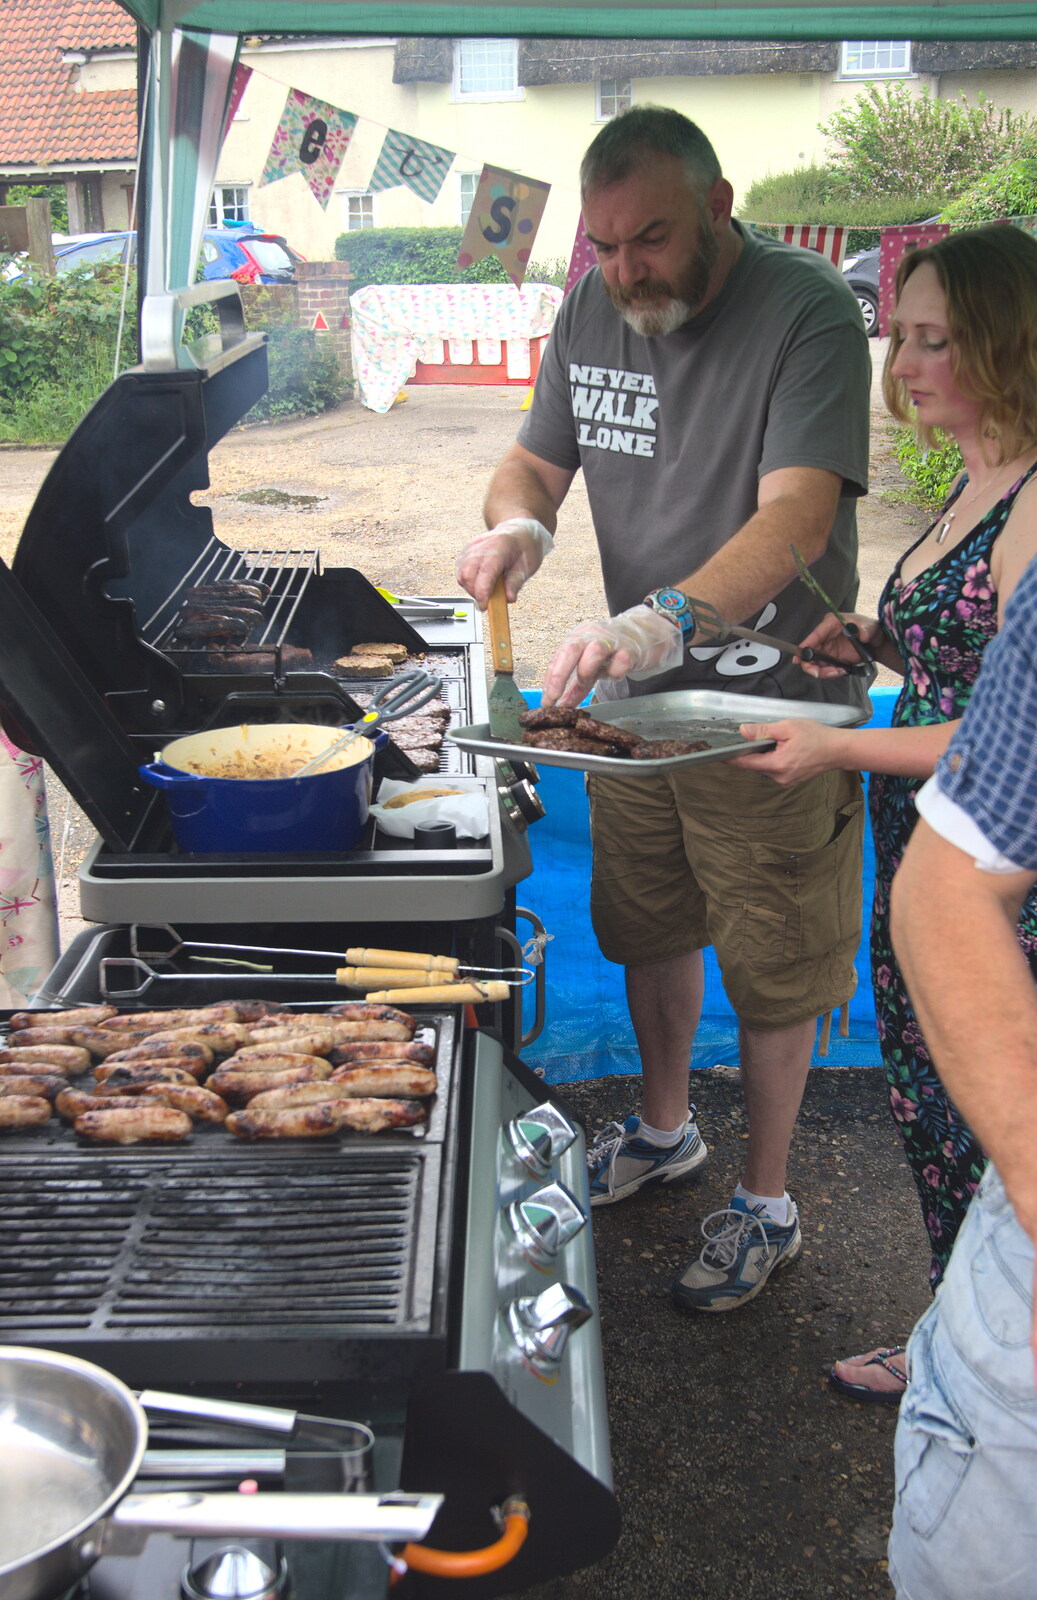 More barbeque action from The Queen's Village Hall Birthday, Brome, Suffolk - 12th June 2016